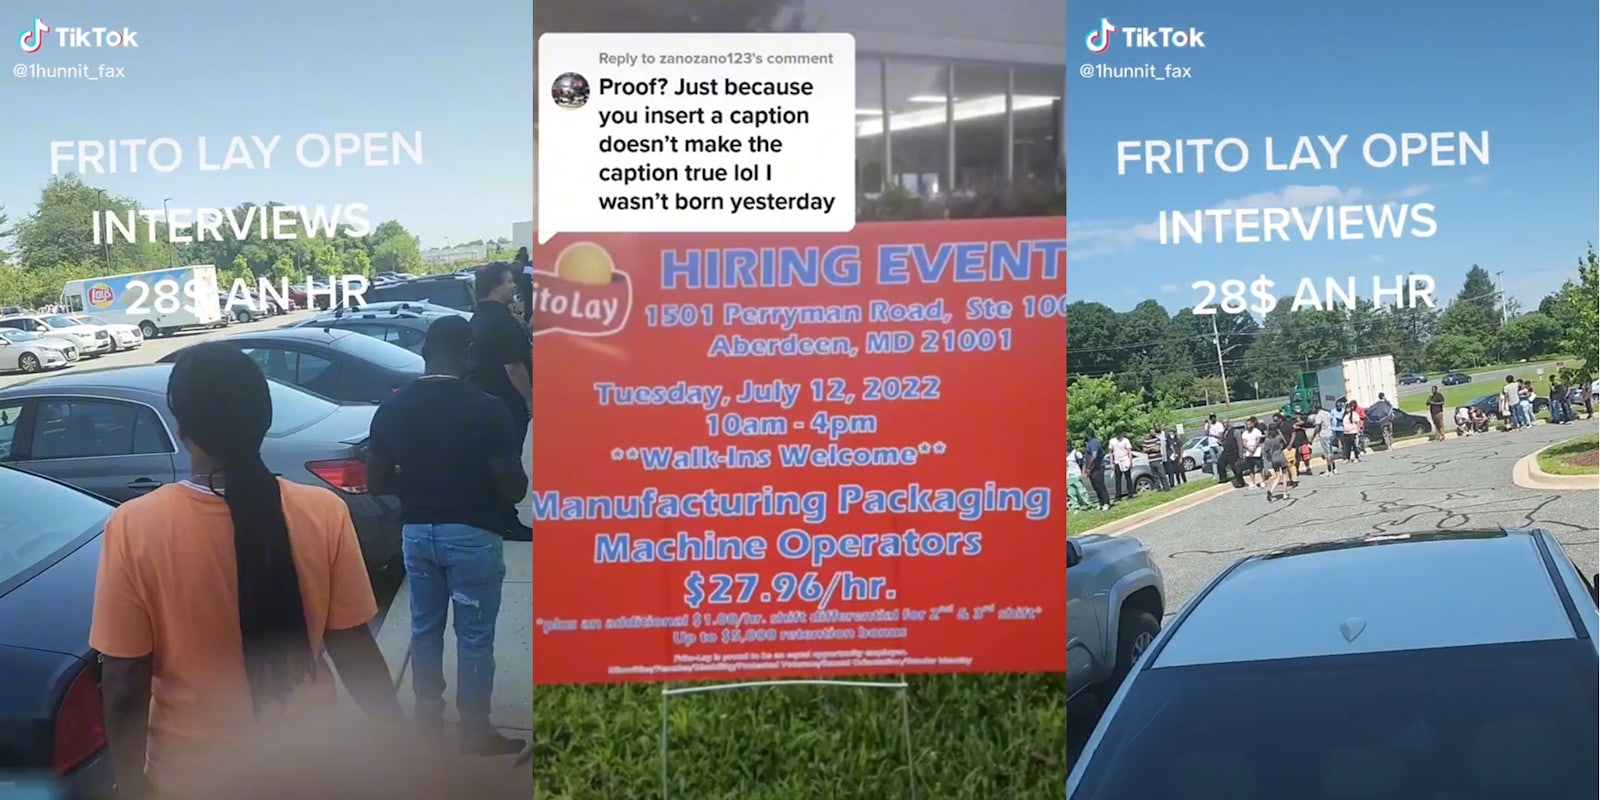 people in line in a parking lot with caption 'Frito Lay open interviews 28$ an hr' (l&r) Frito Lay's plant 'Hiring Event' sign with caption 'Proof? Just because you insert a caption doesn't make the caption true lol I wasn't born yesterday' (c)